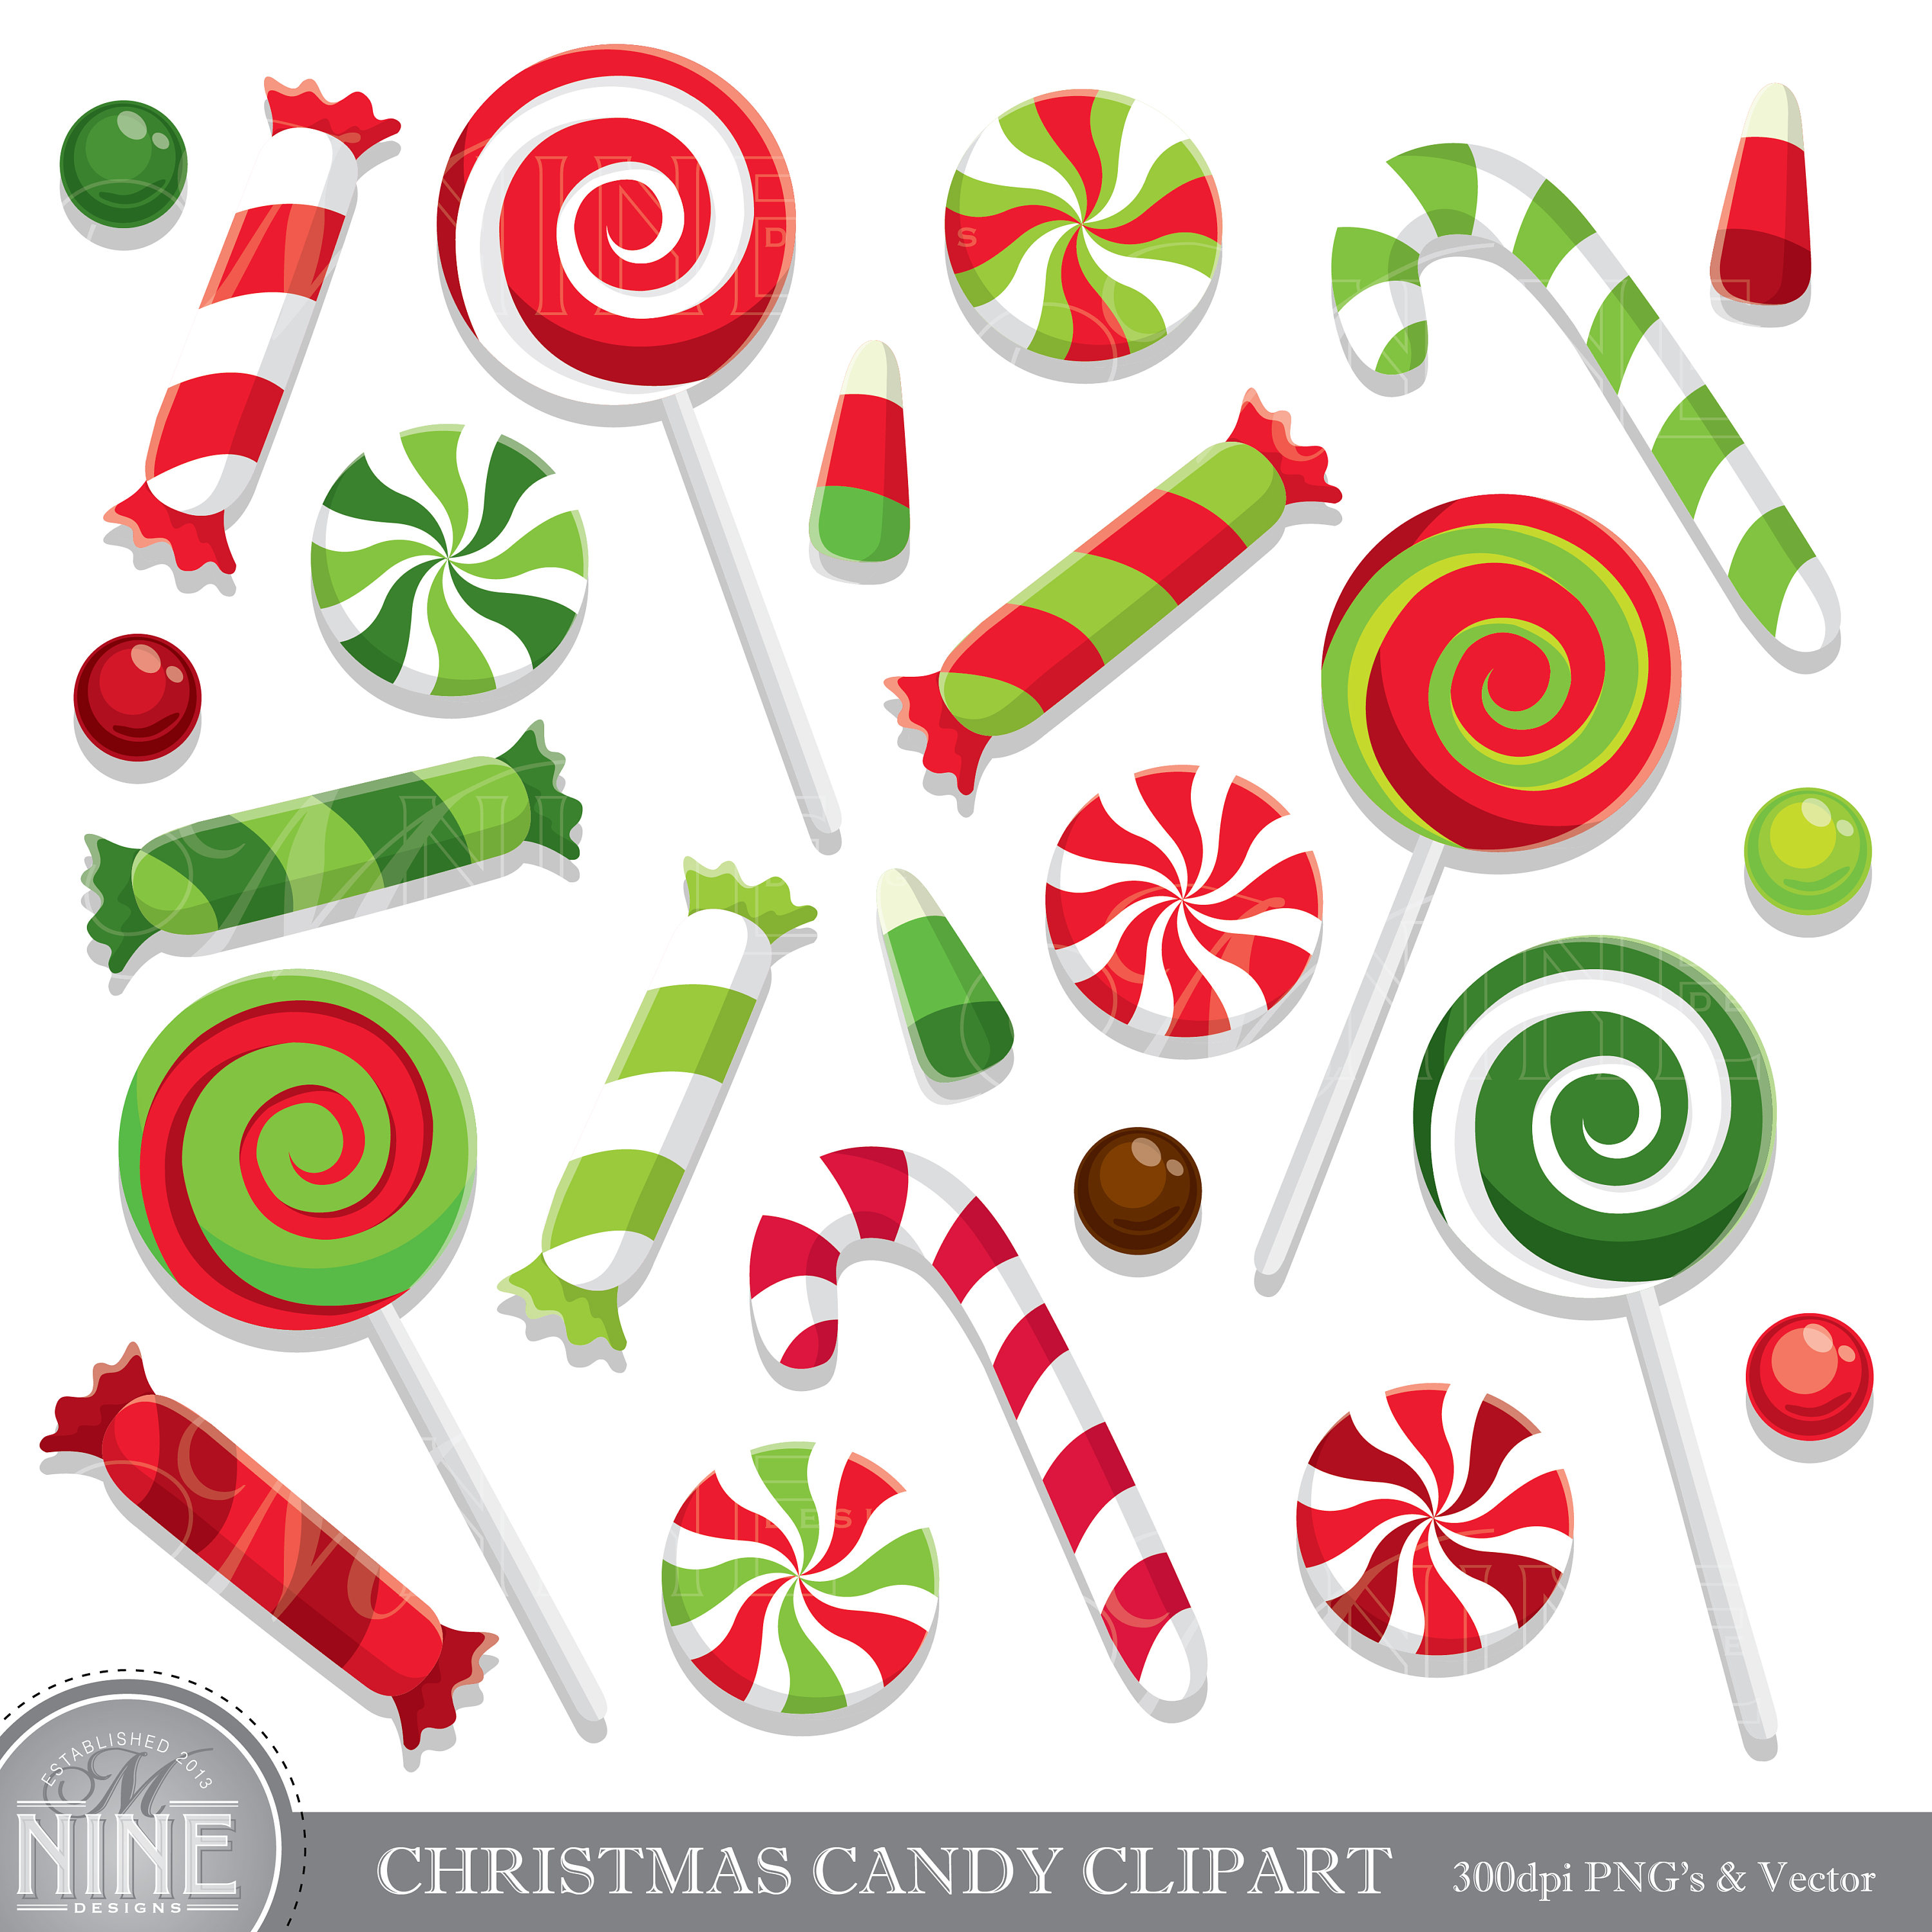 Candyland clipart candy cane. Christmas clip art holiday